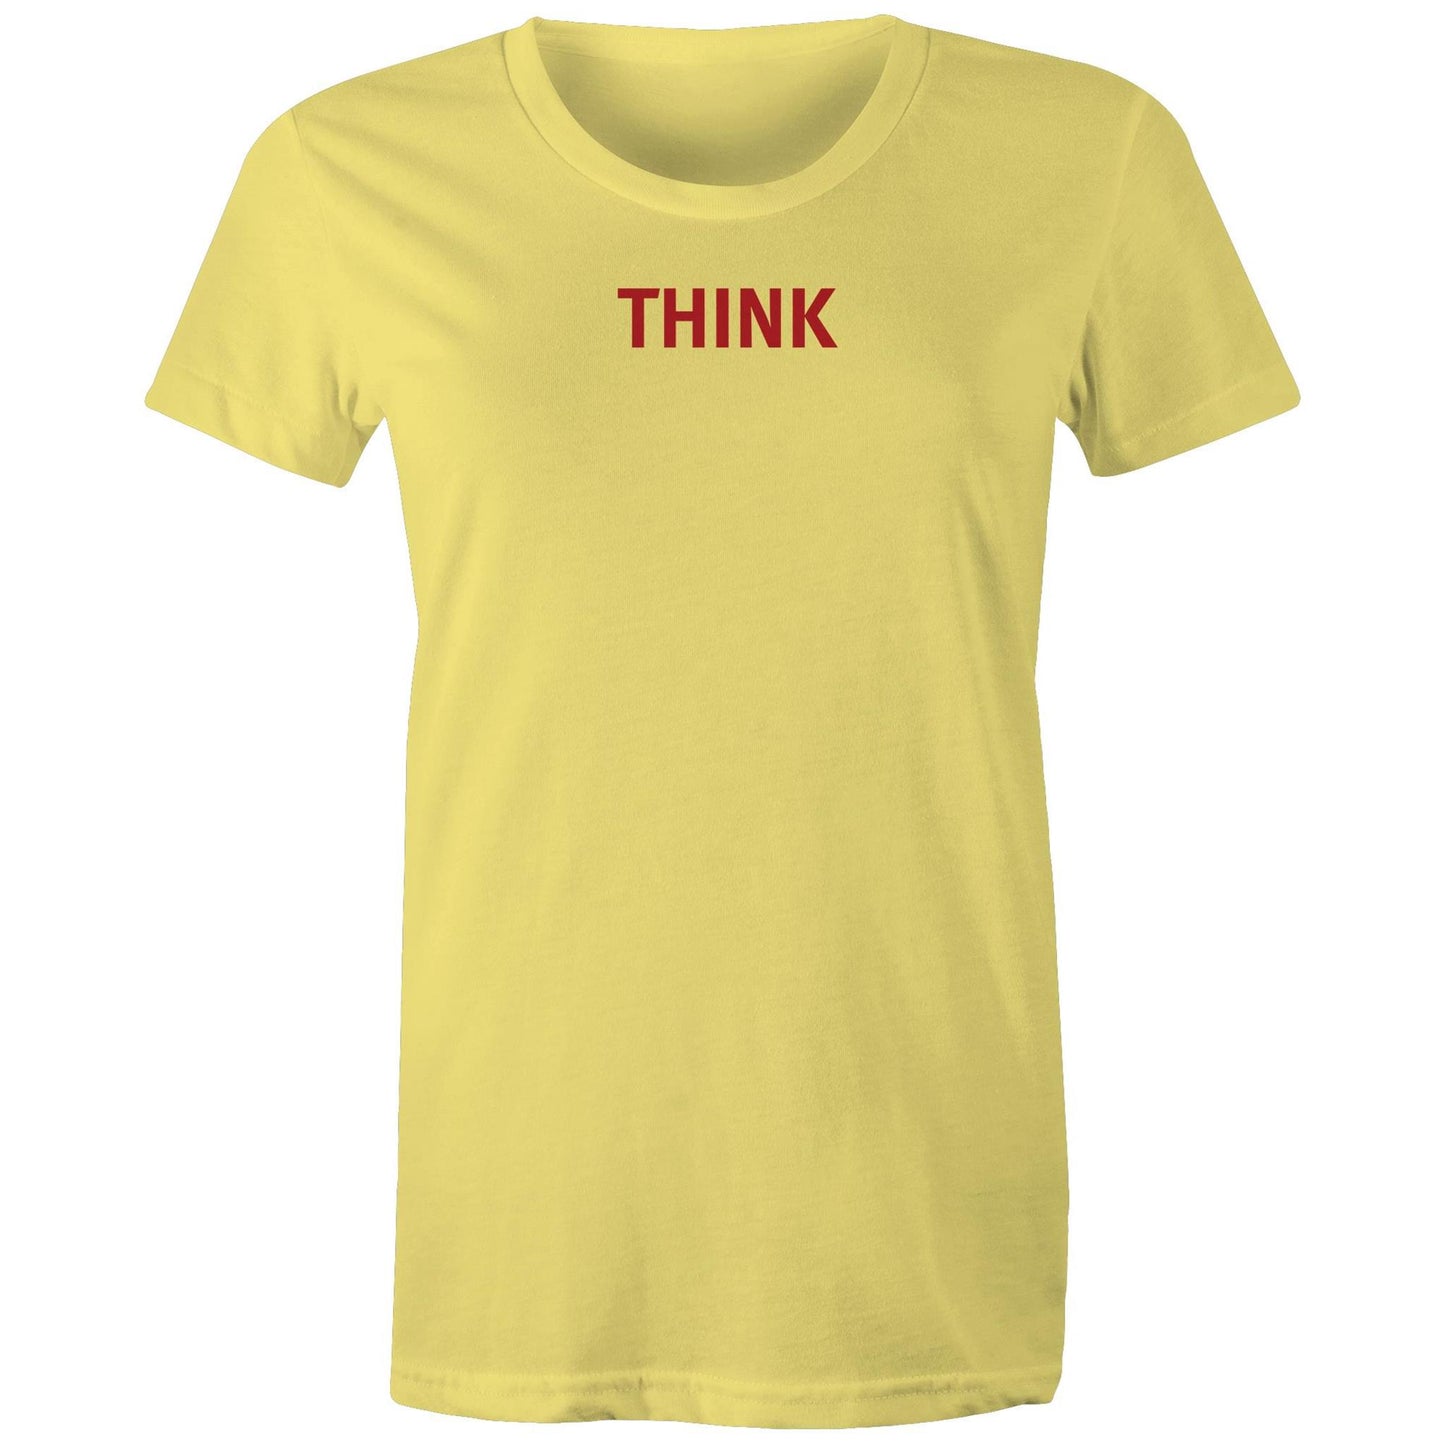 THINK Word T Shirts for Women